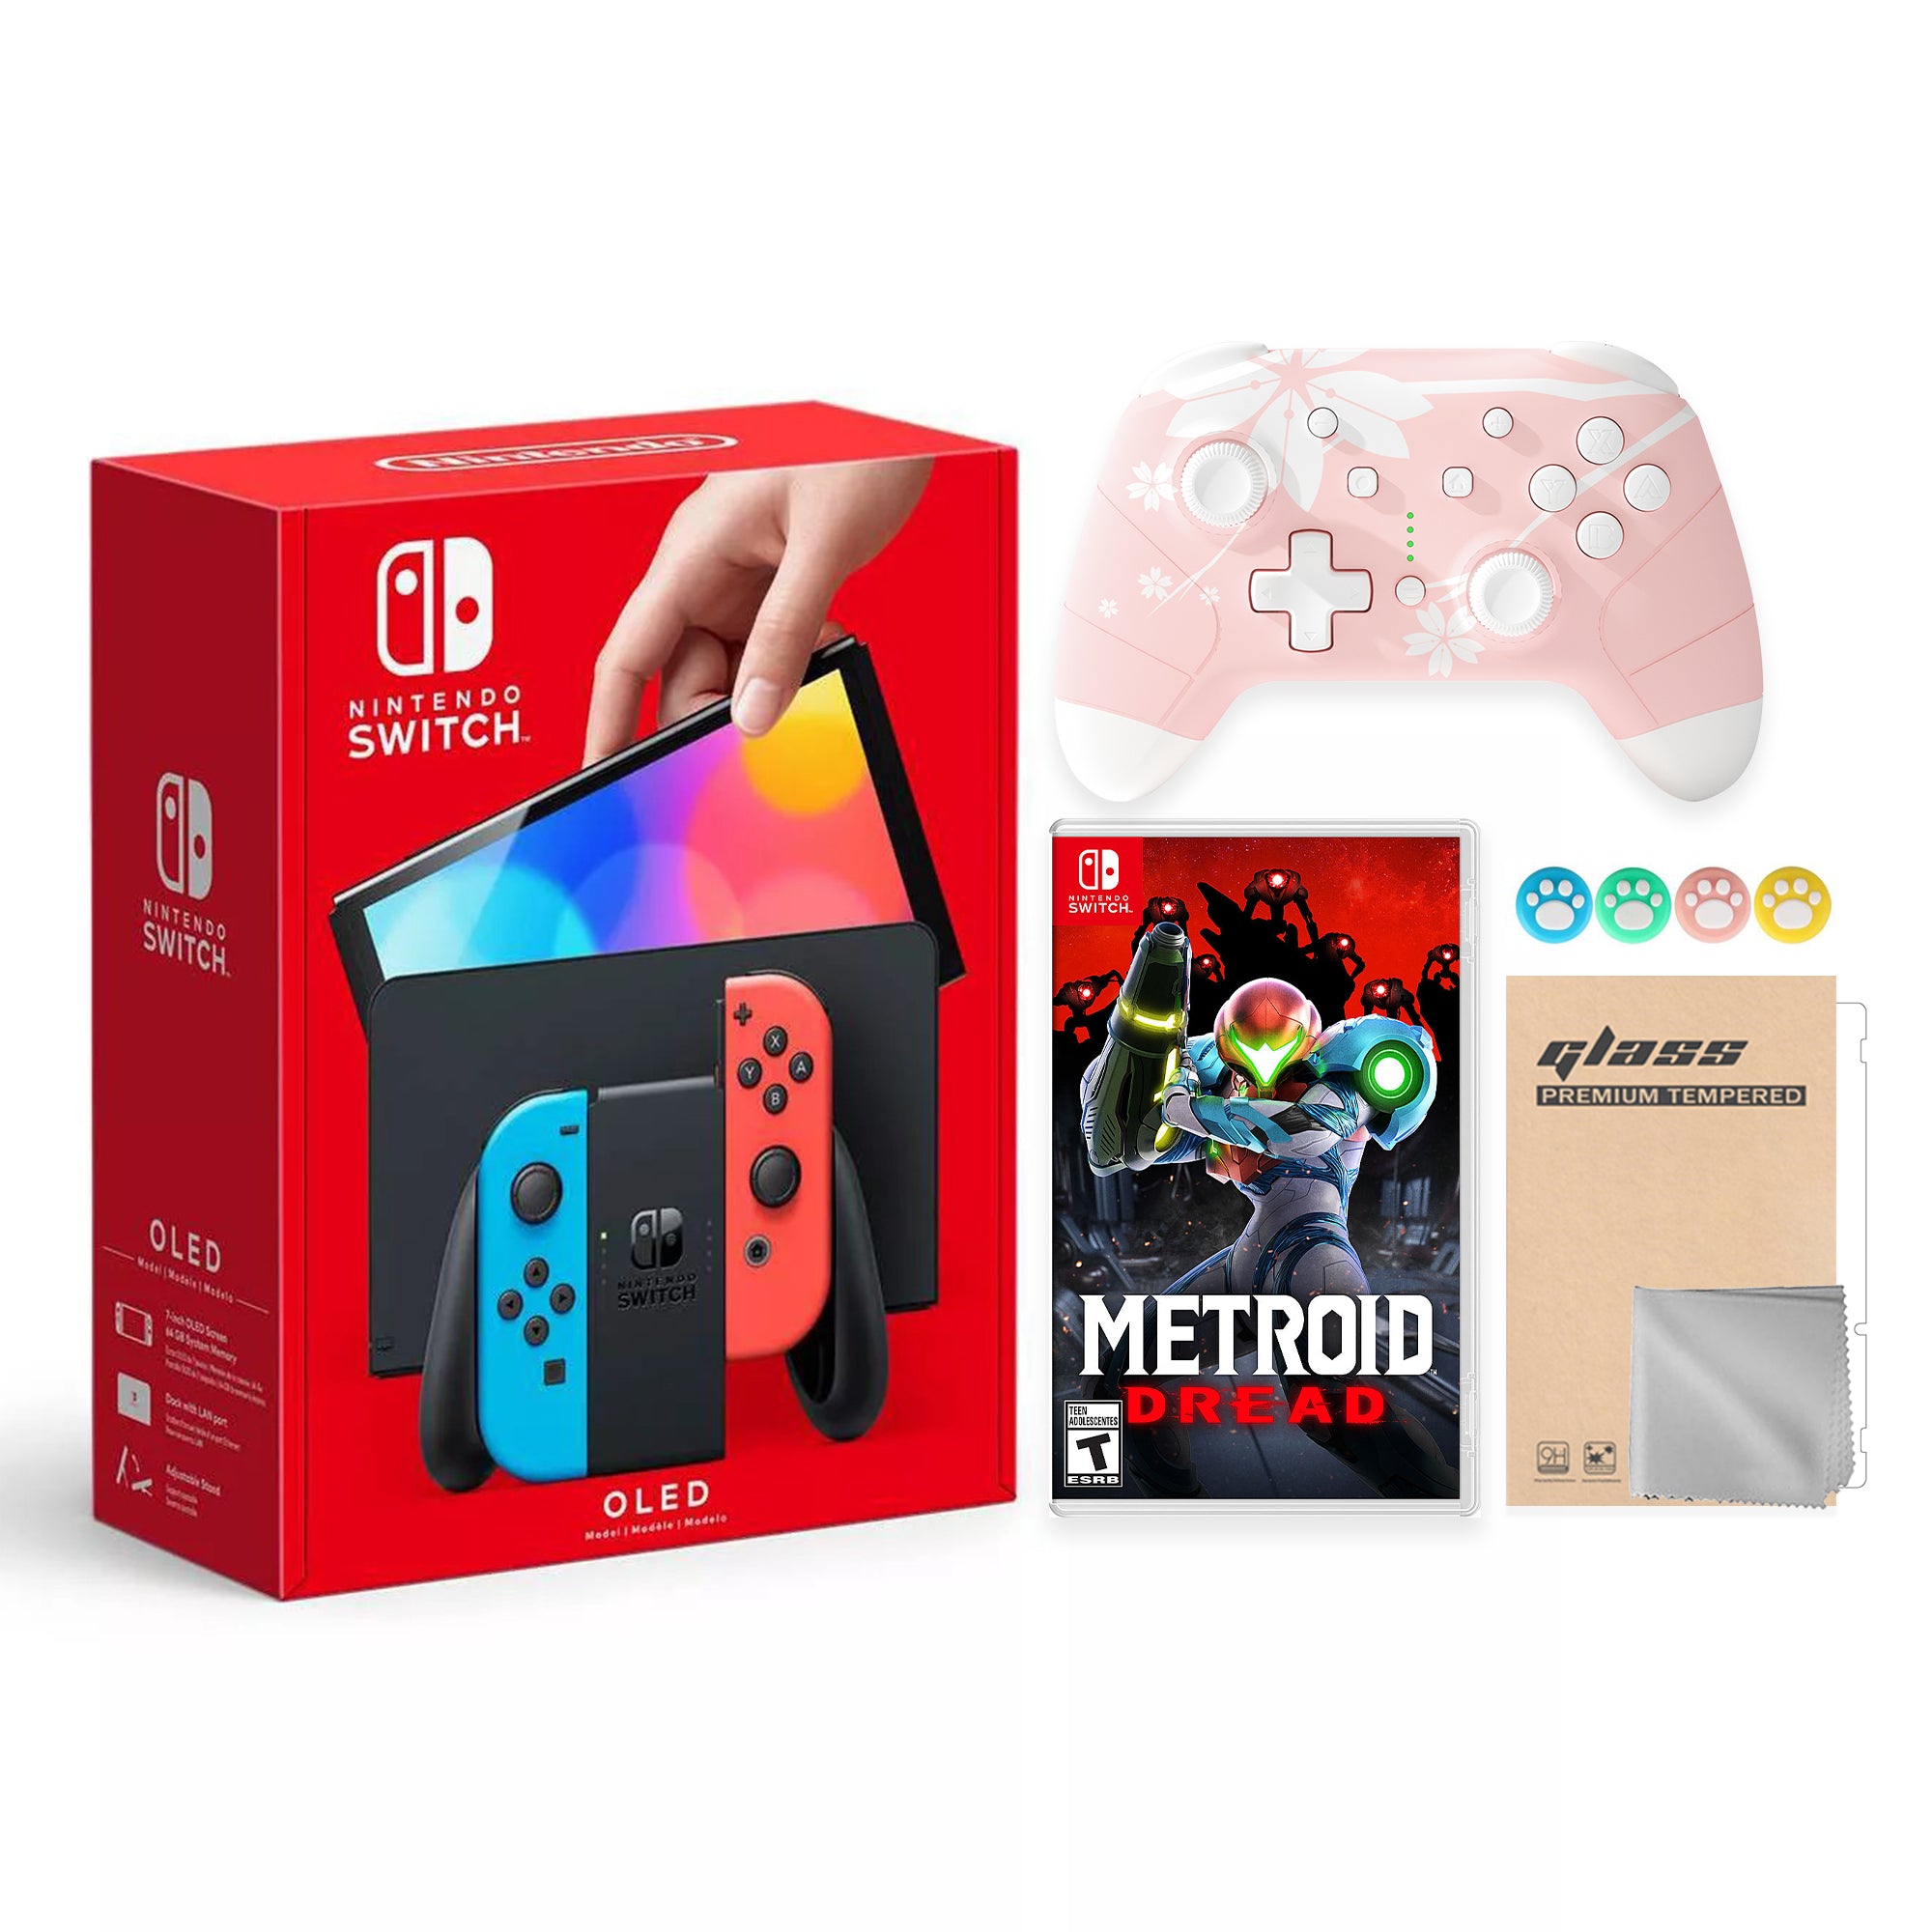 2022 New Nintendo Switch OLED Model Neon Red Blue Joy Con 64GB Console Improved HD Screen & LAN-Port Dock with Metroid Dread -  Mytrix Wireless Switch Pro Controller and Accessories